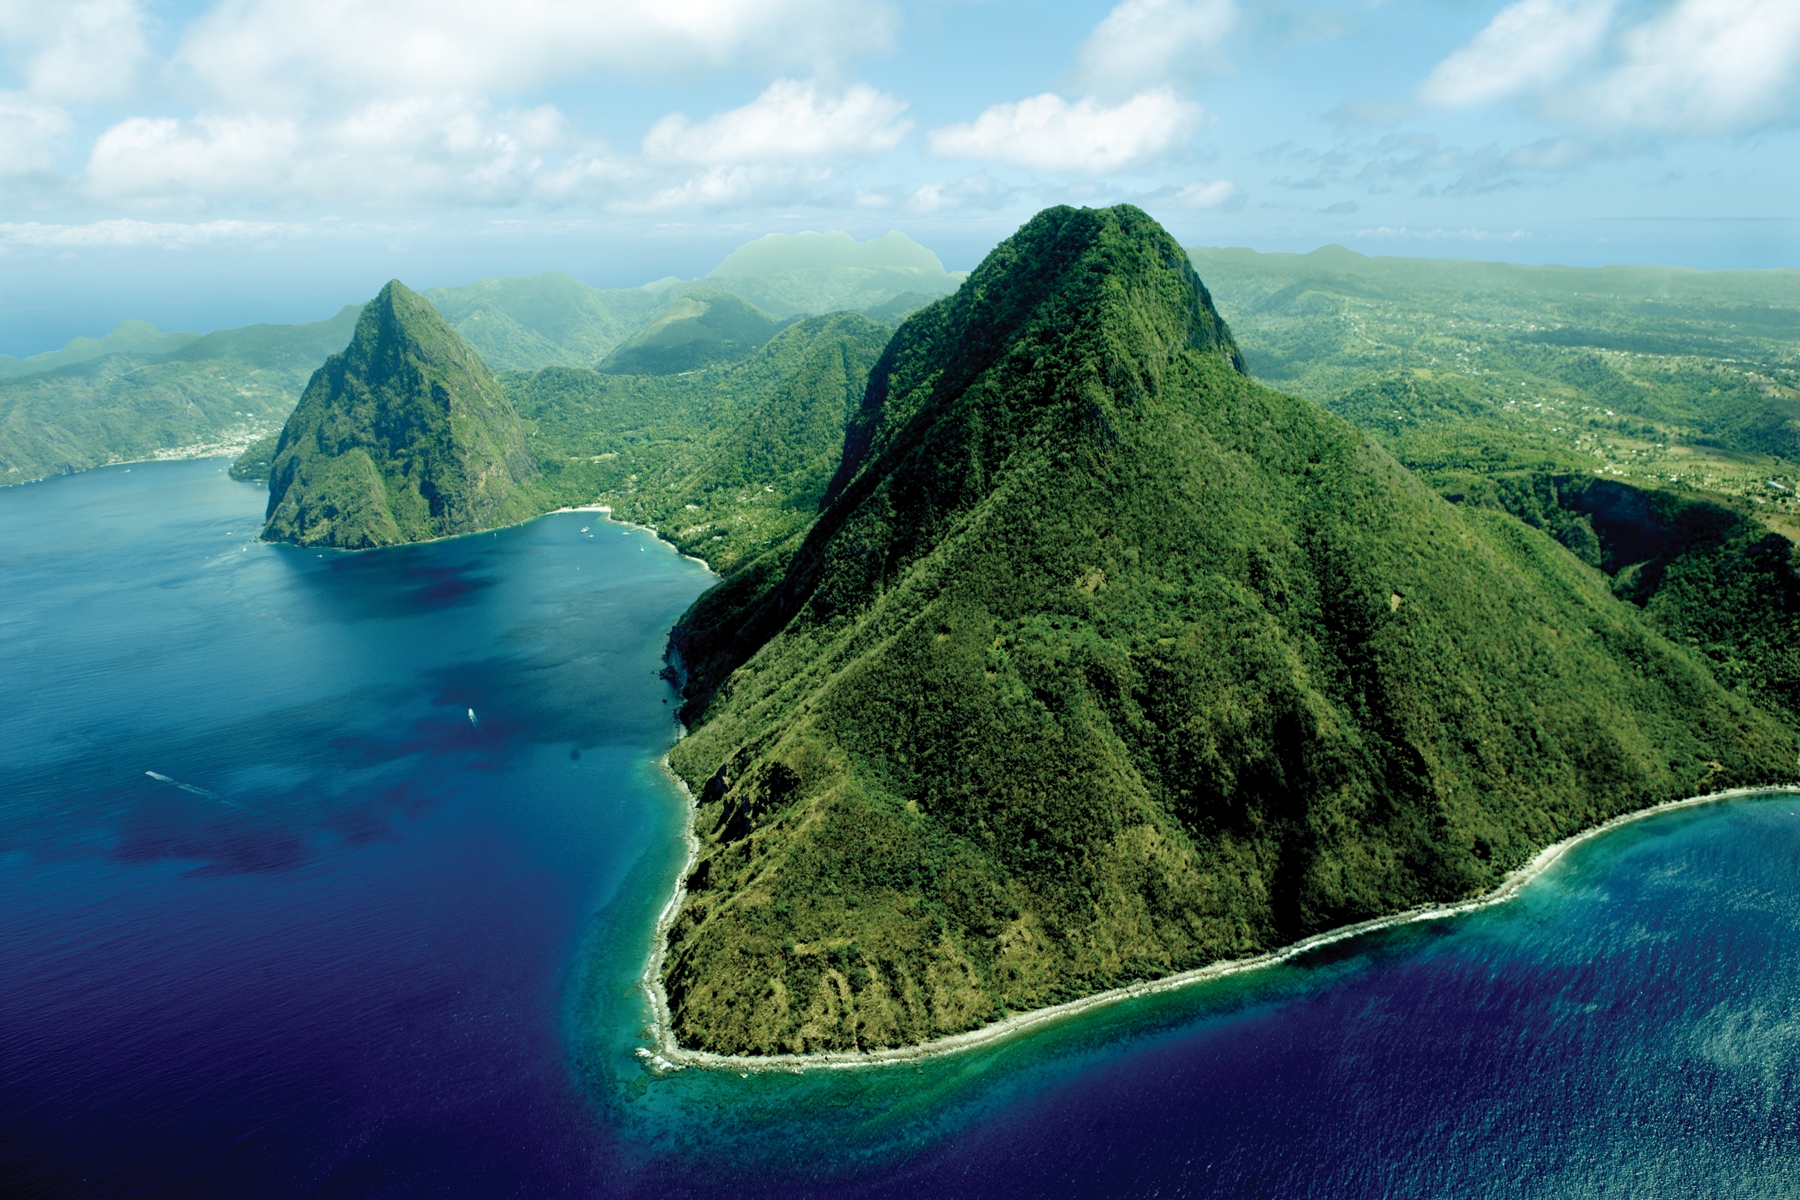 Visit a World Heritage Site: The Pitons, St. Lucia